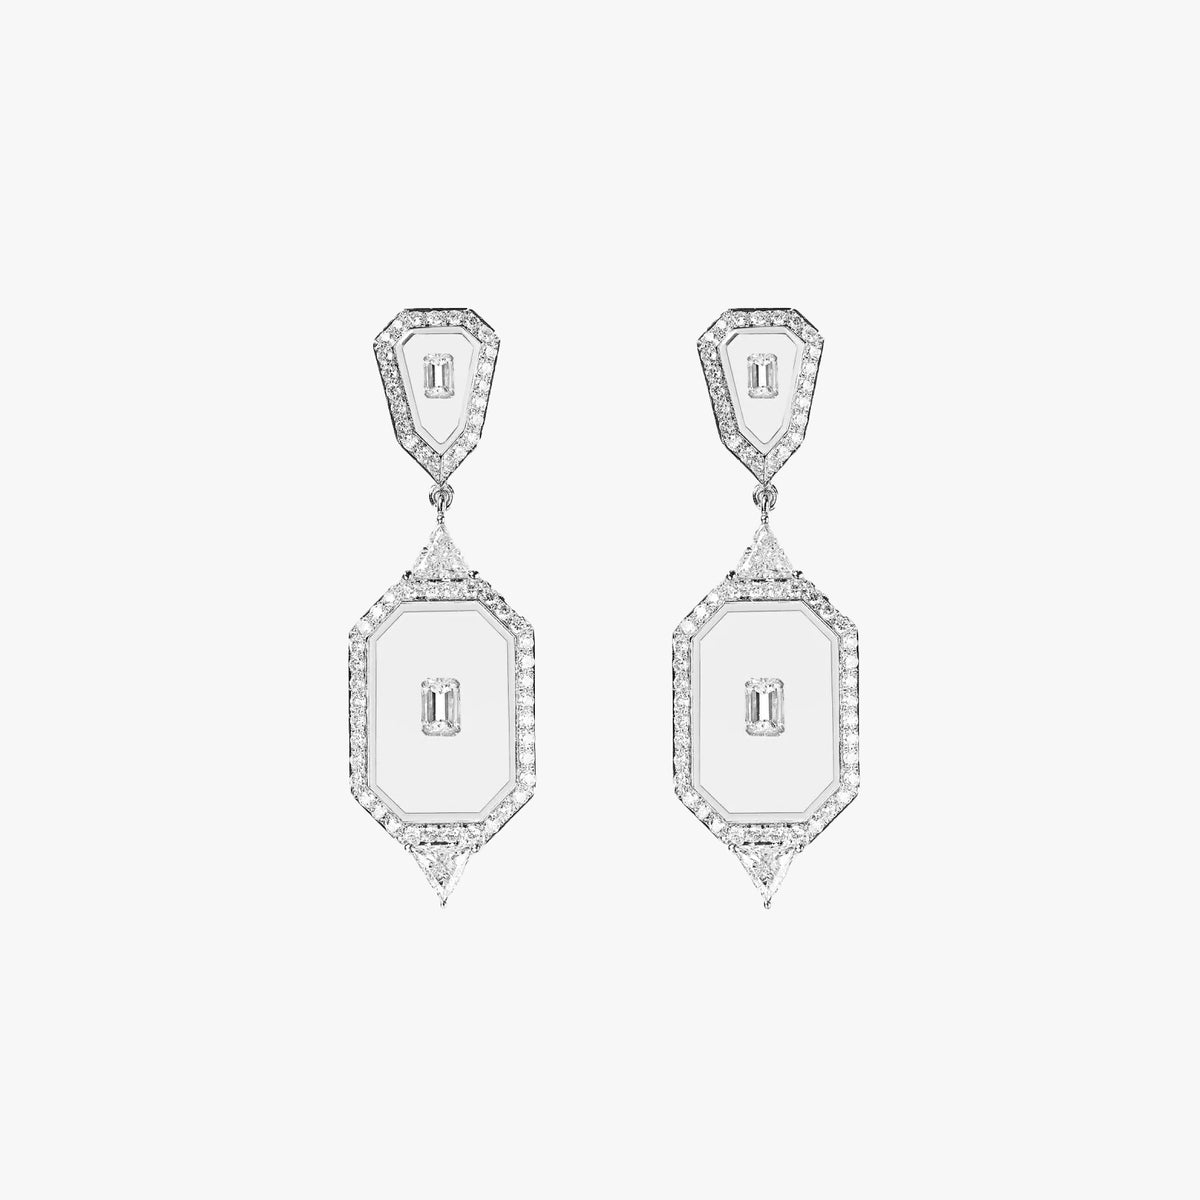 Universe earrings with trillion and emerald cut diamonds